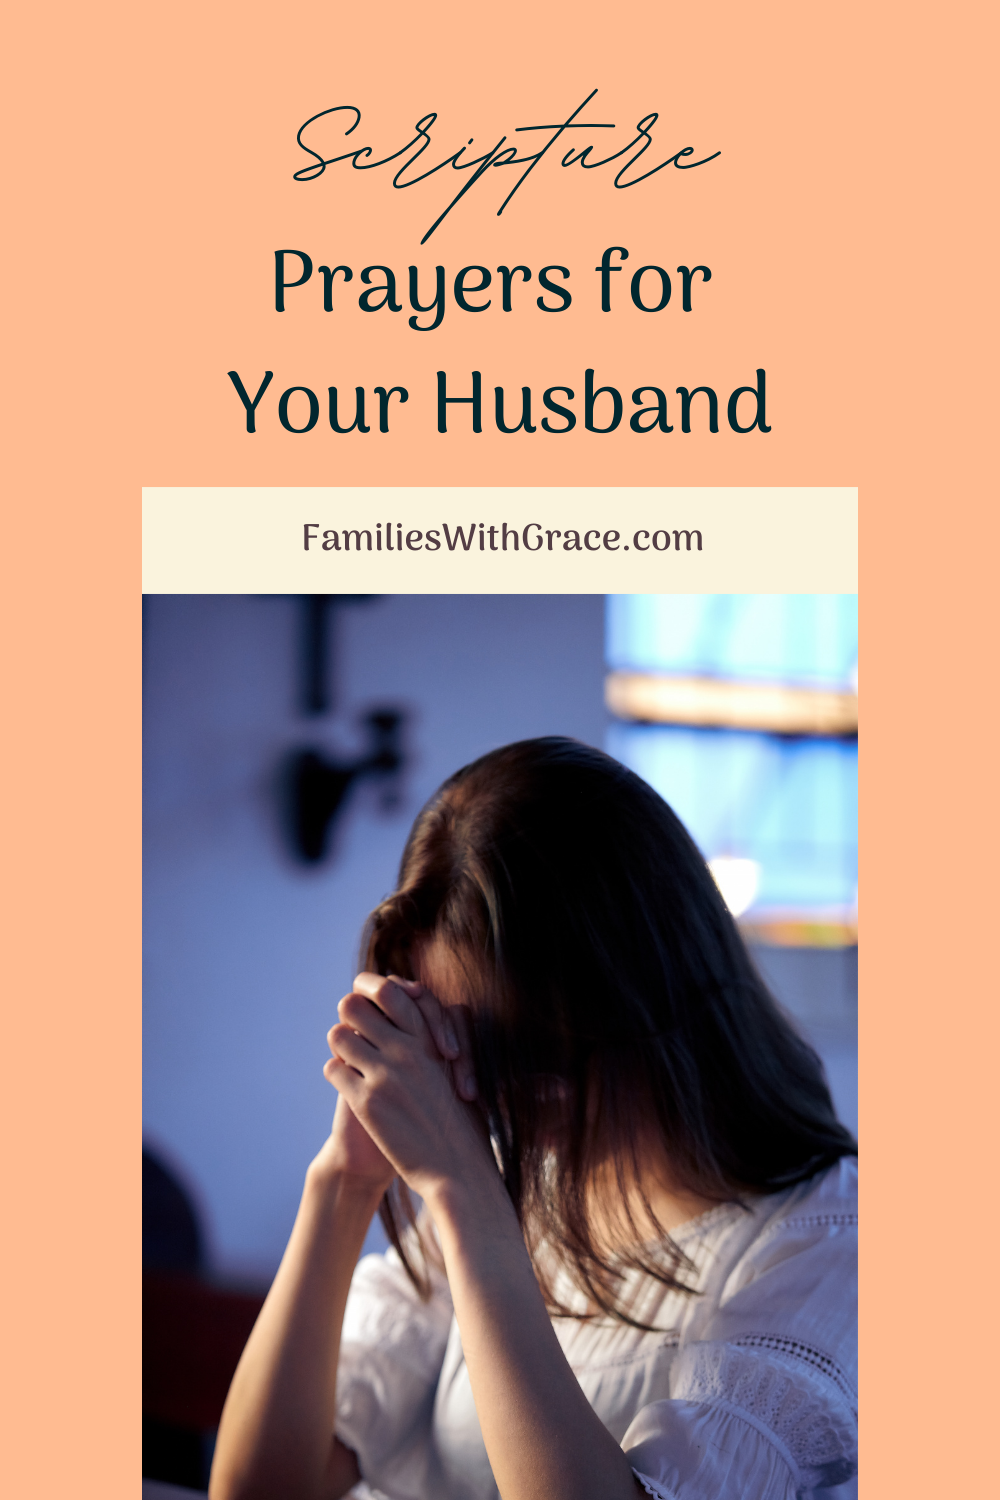 8 Prayers for your husband